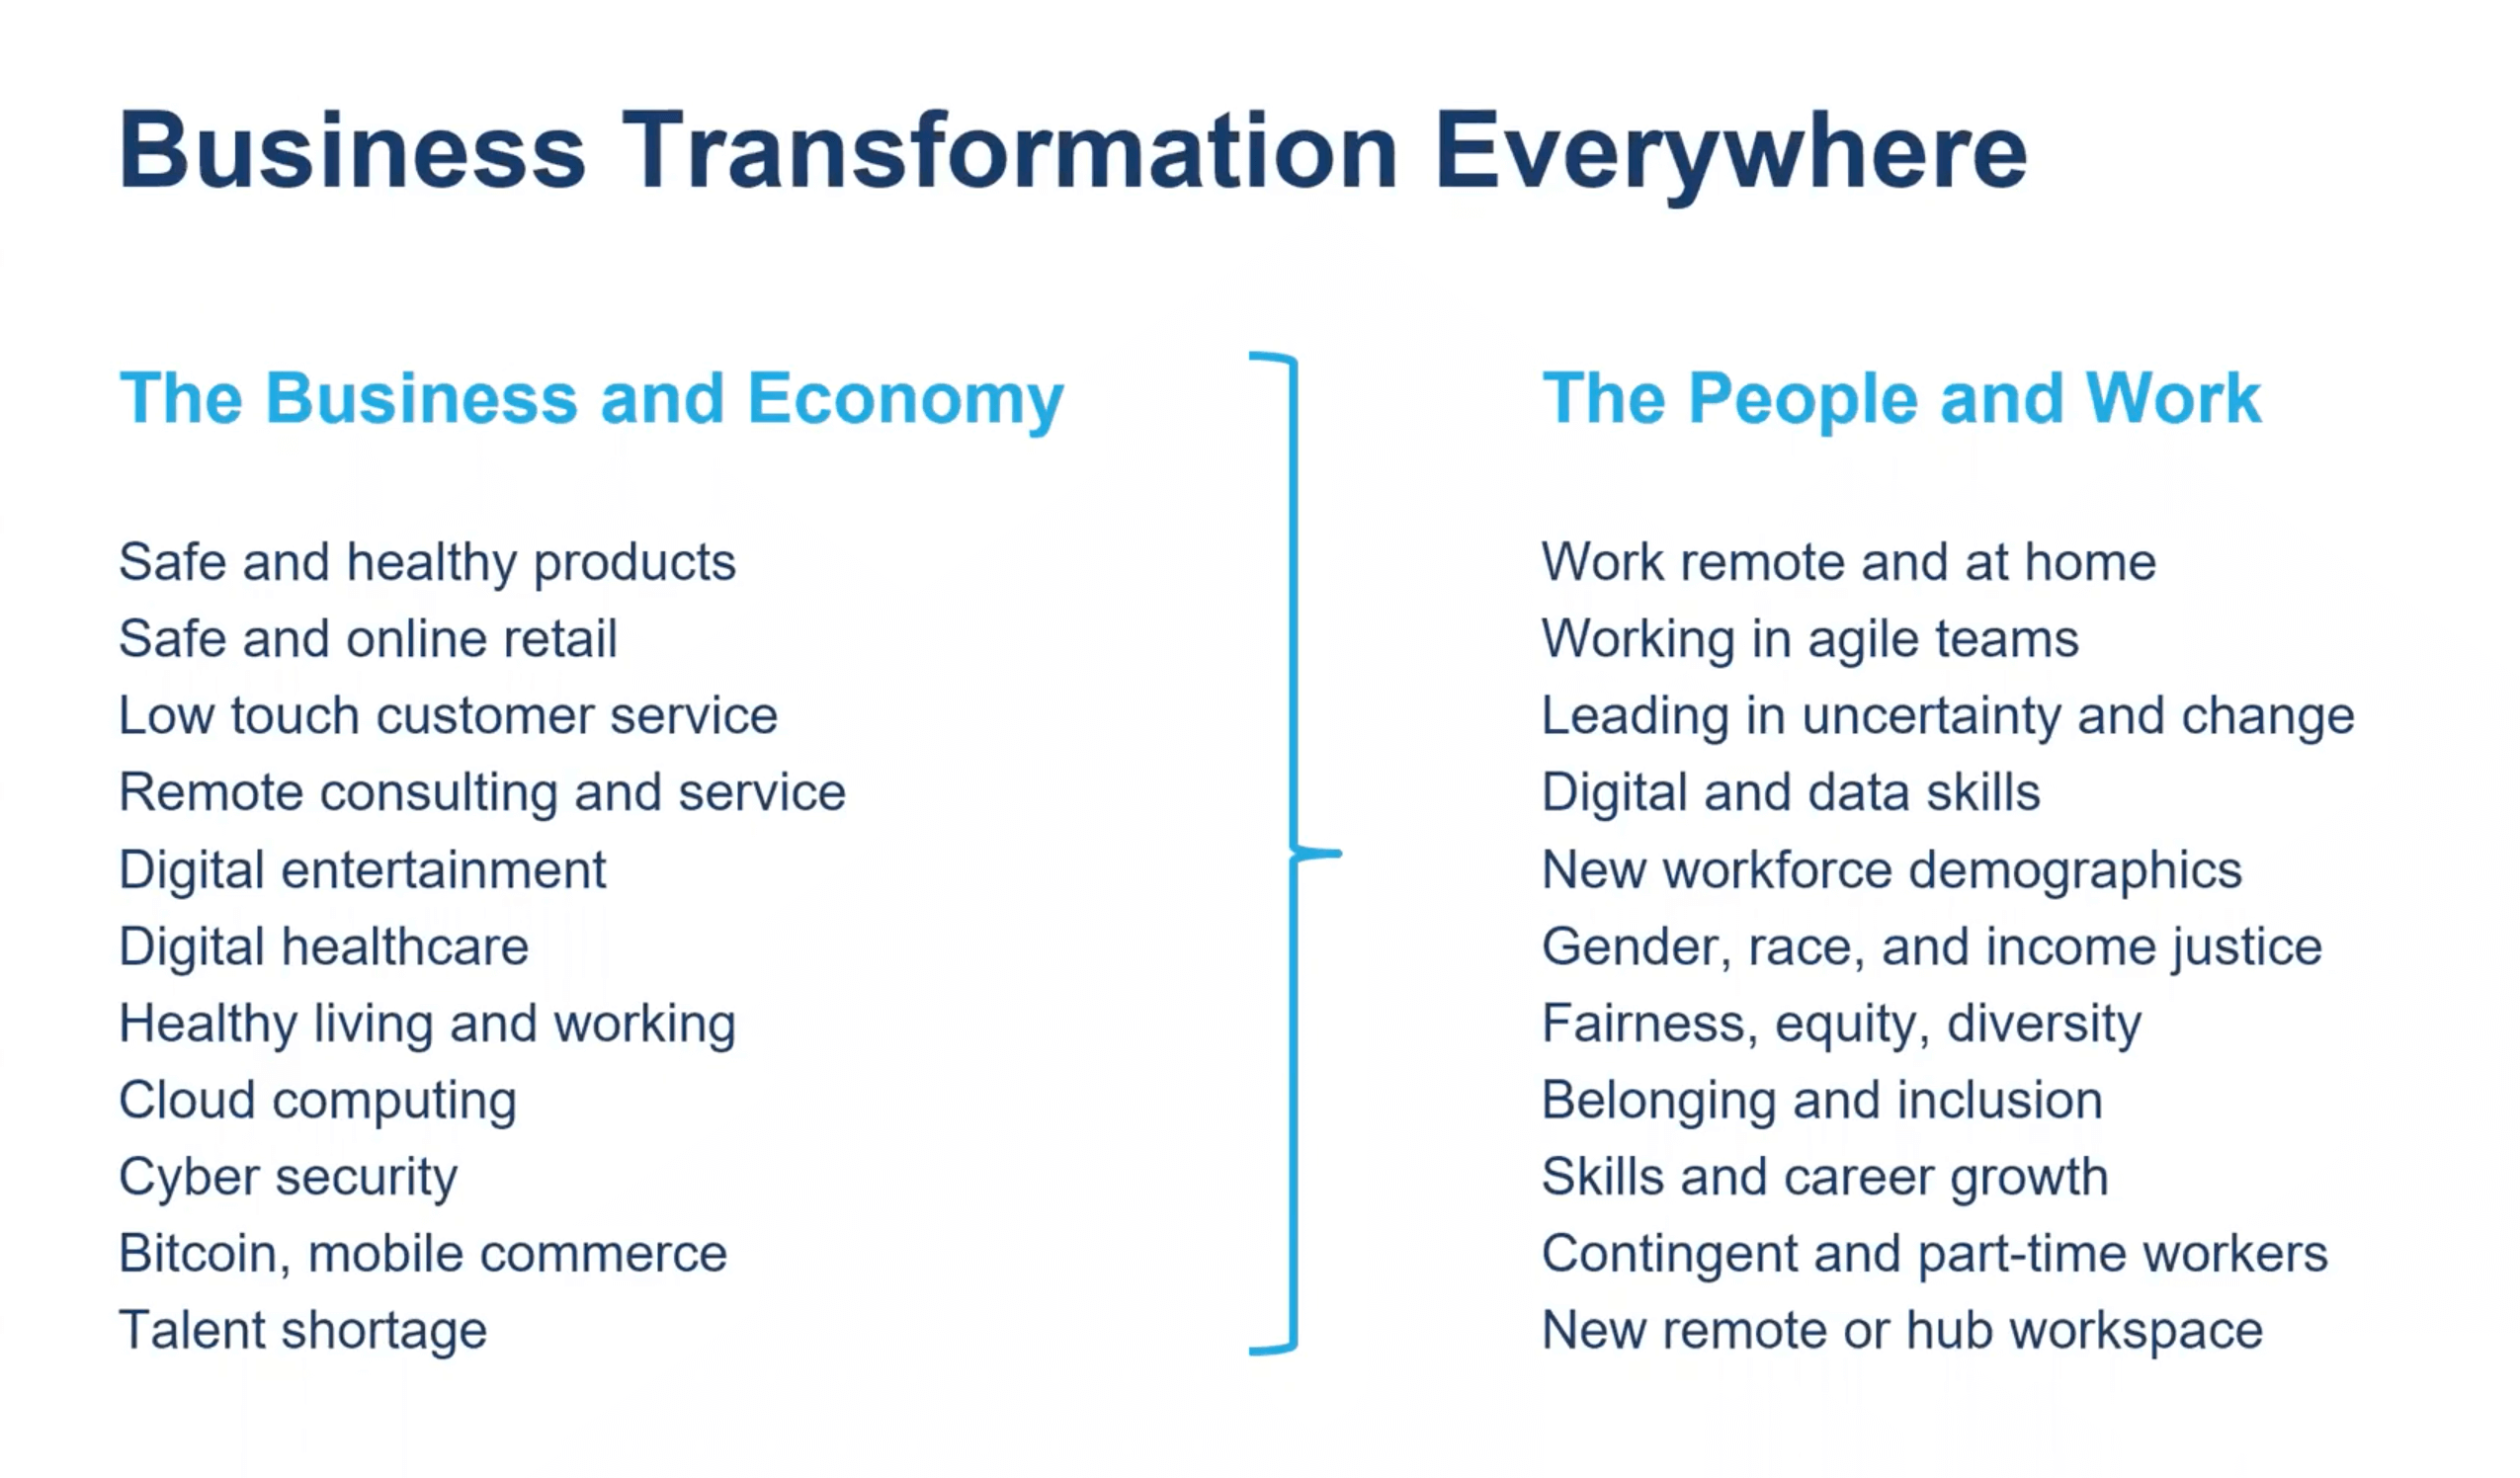 business transformation is everywhere